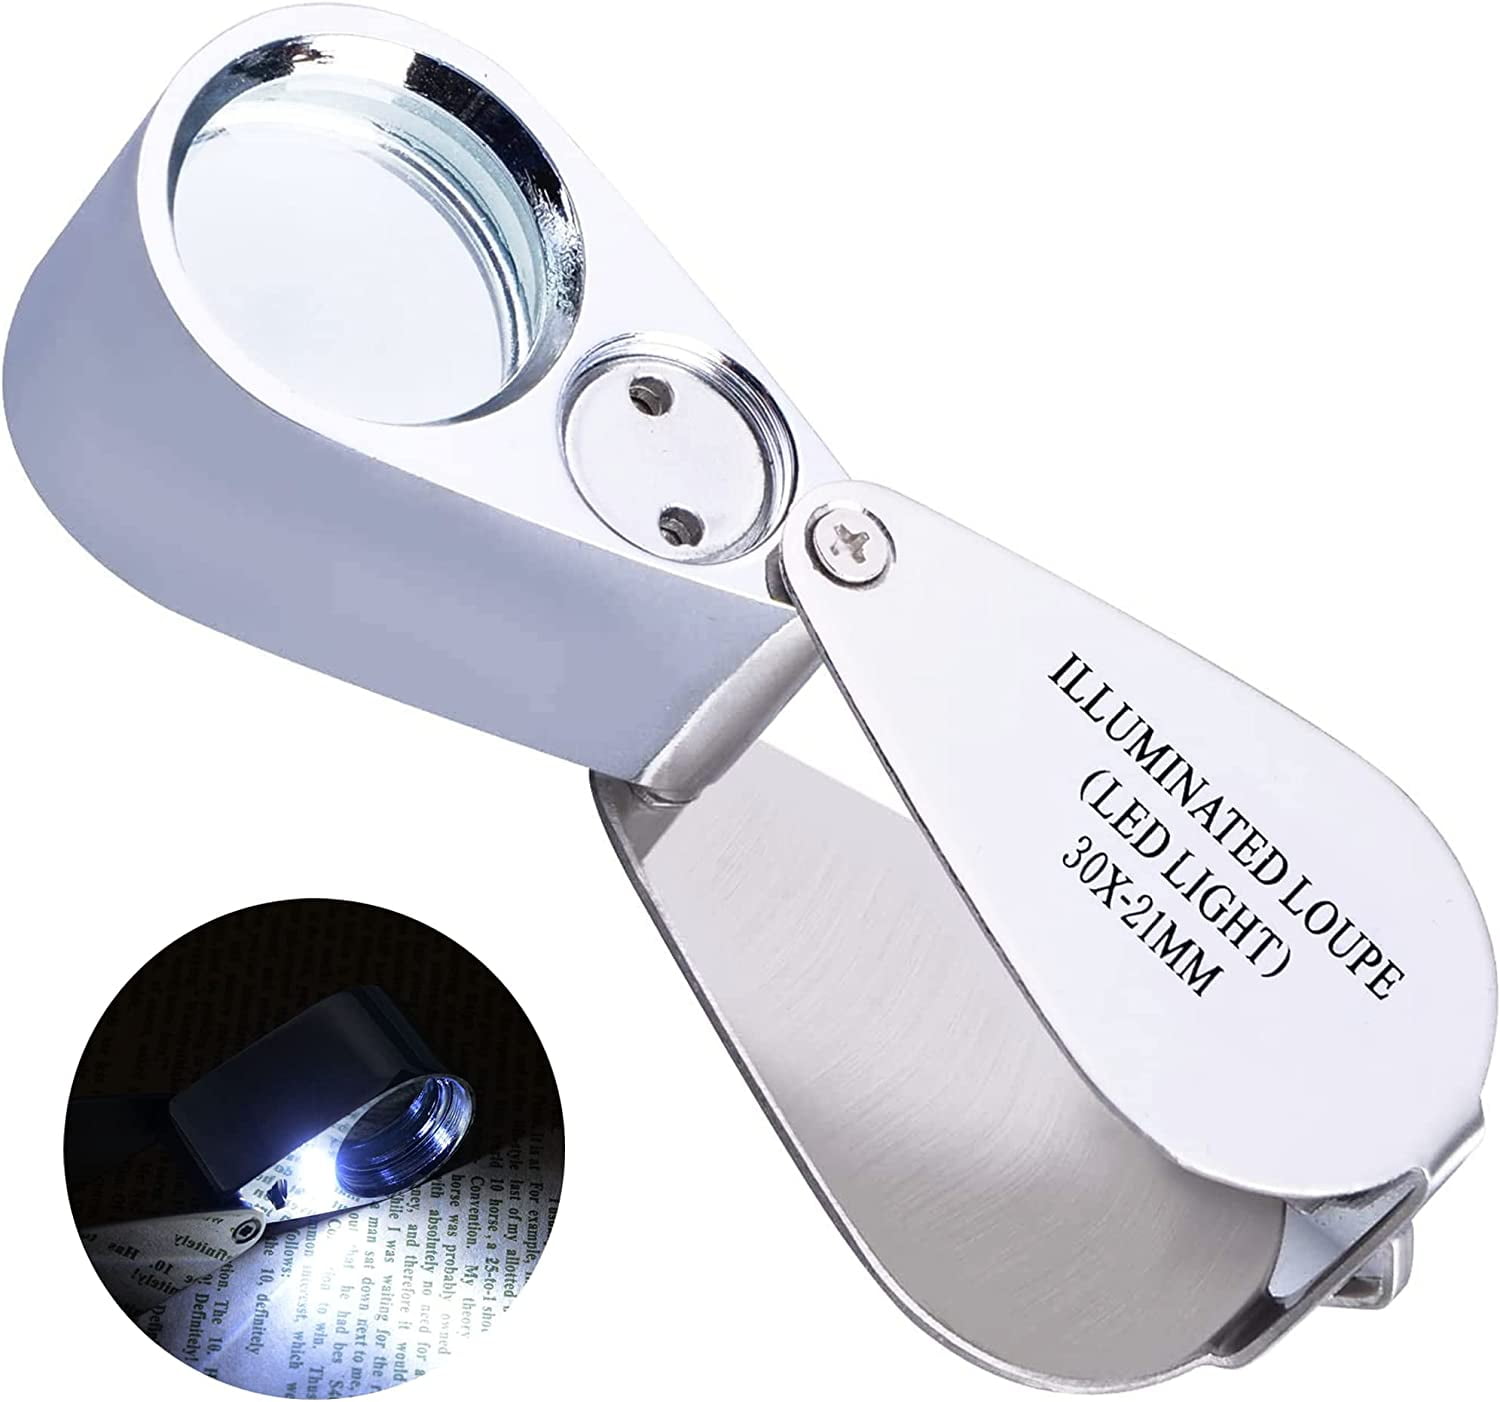 GEM-309 Magnifying Glass 30x Magnification Jewelers Loupe, 6